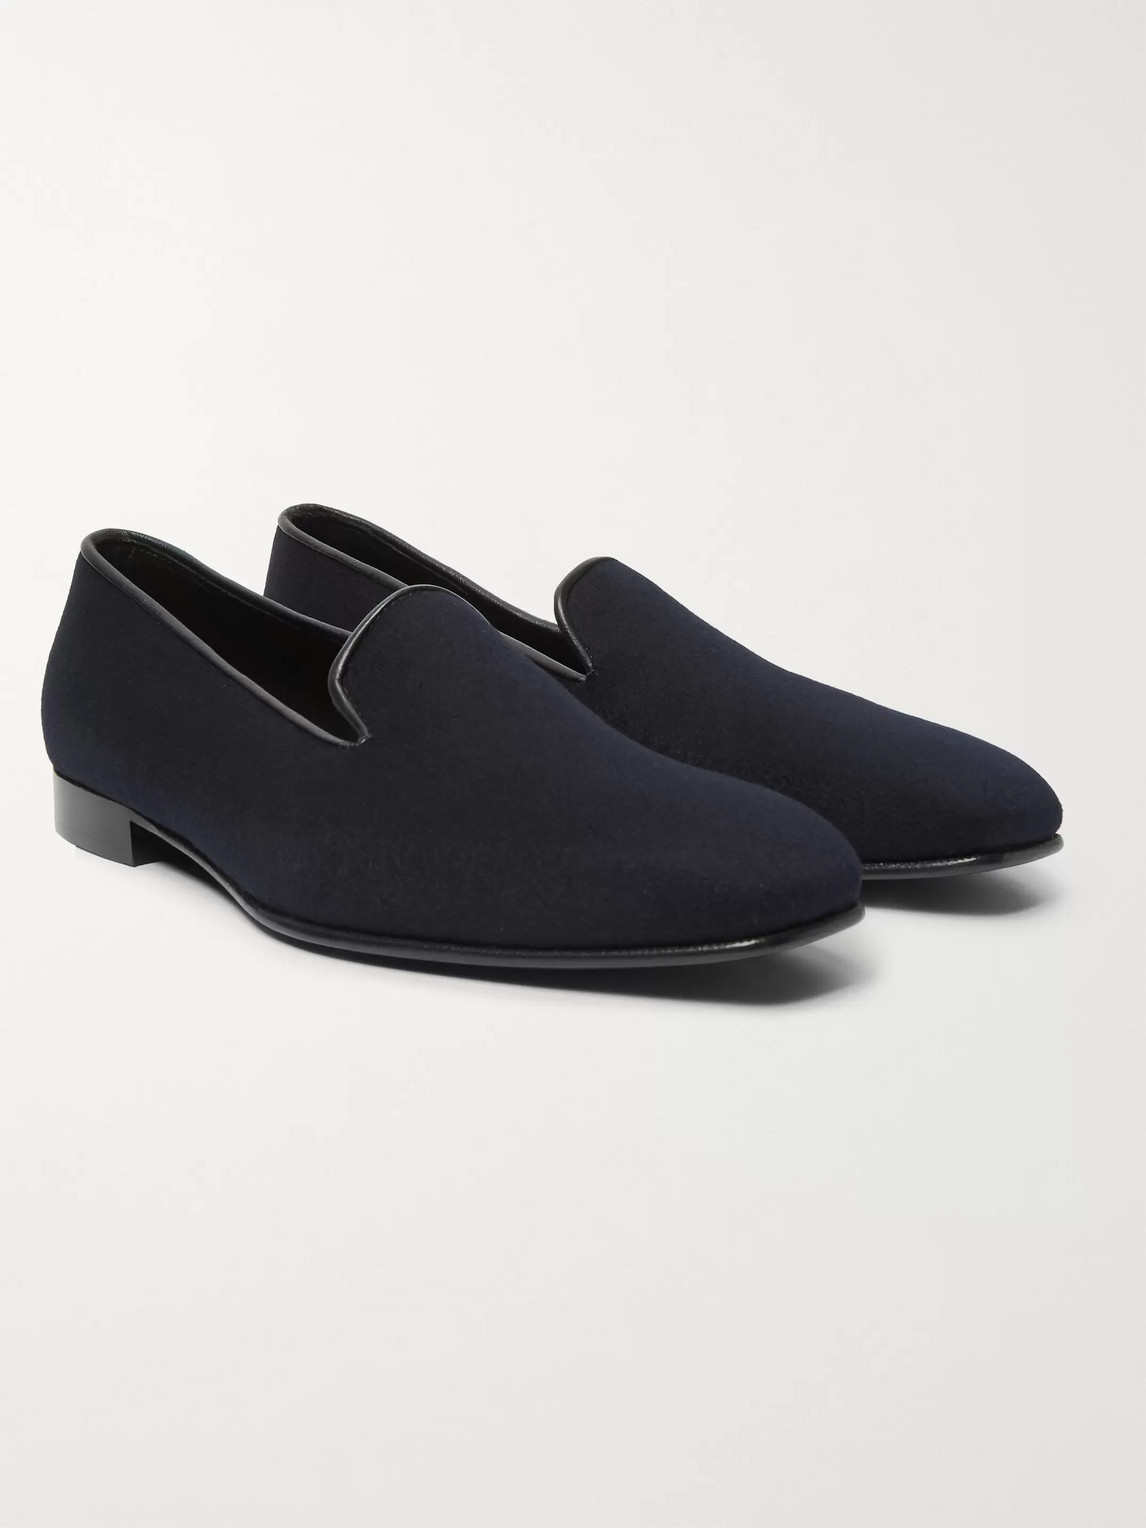 Anderson & Sheppard George Cleverley Leather-trimmed Cashmere Slippers In Blue